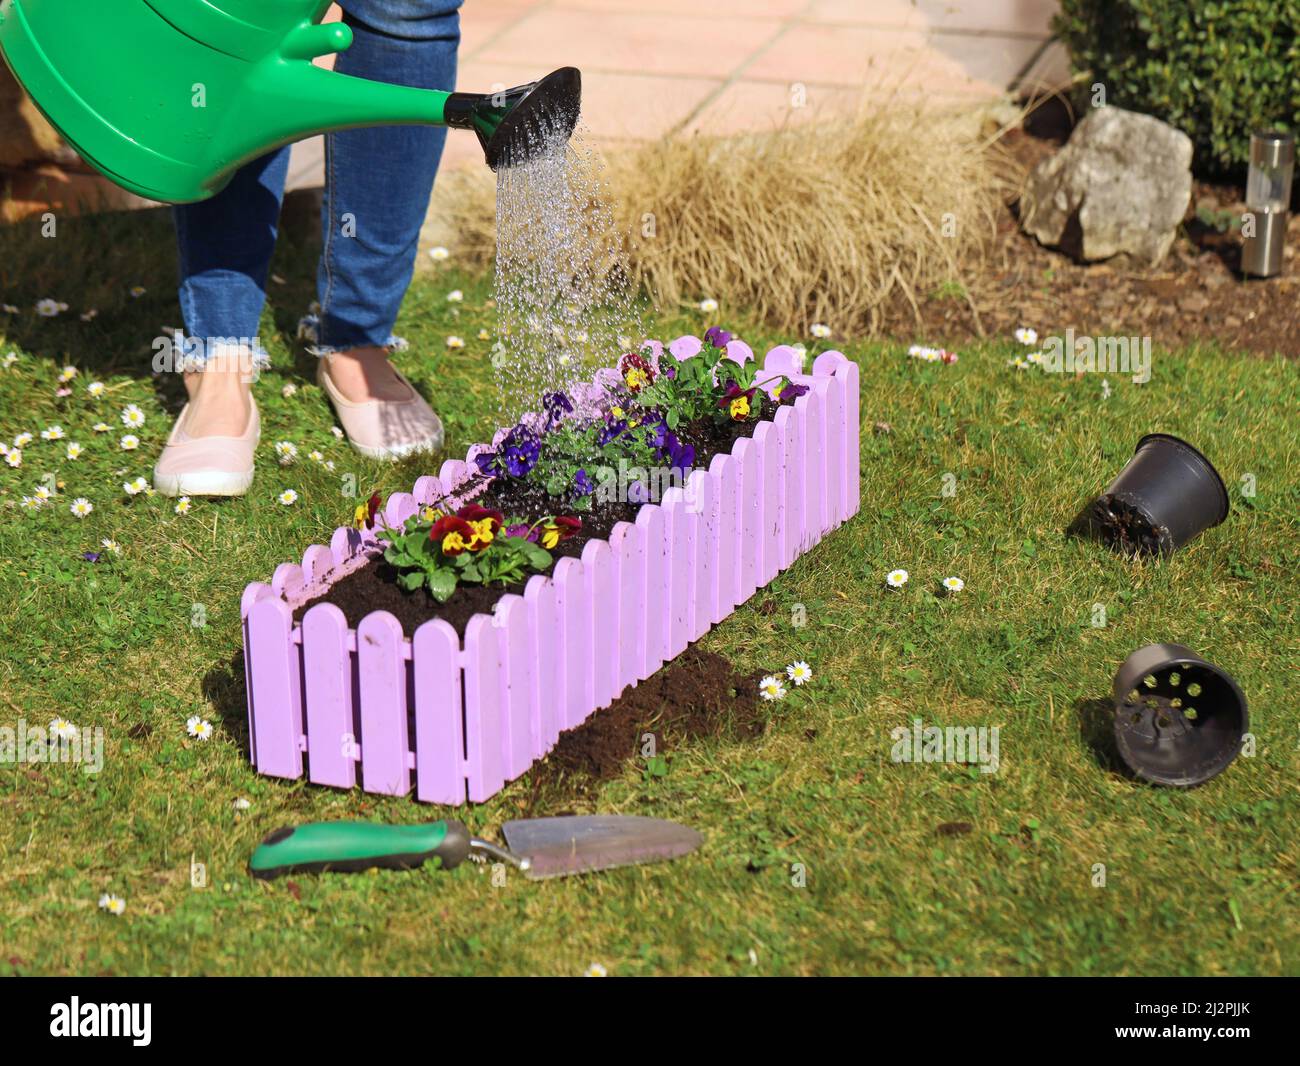 Woman watering freshly planted pansies in flower box with green watering can, close up of spring gardening Stock Photo